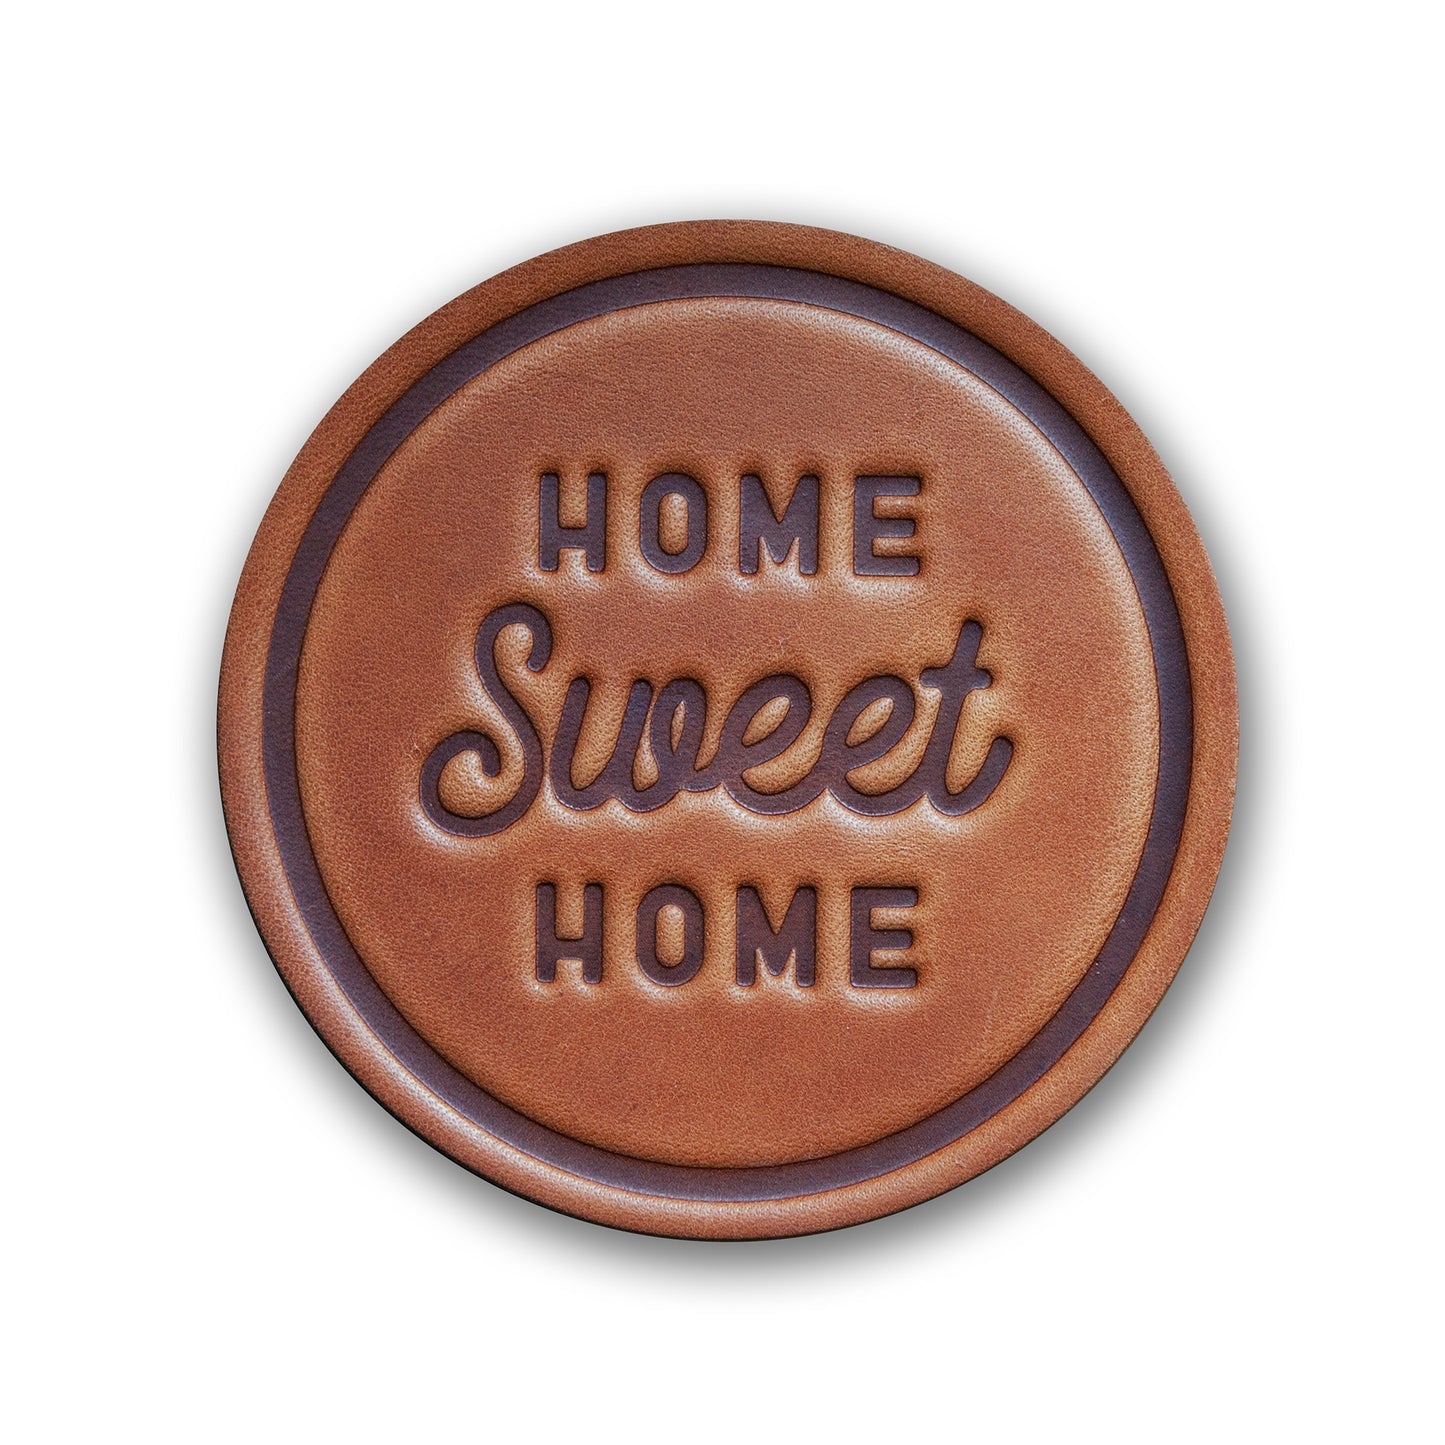 home sweet Home leather coaster